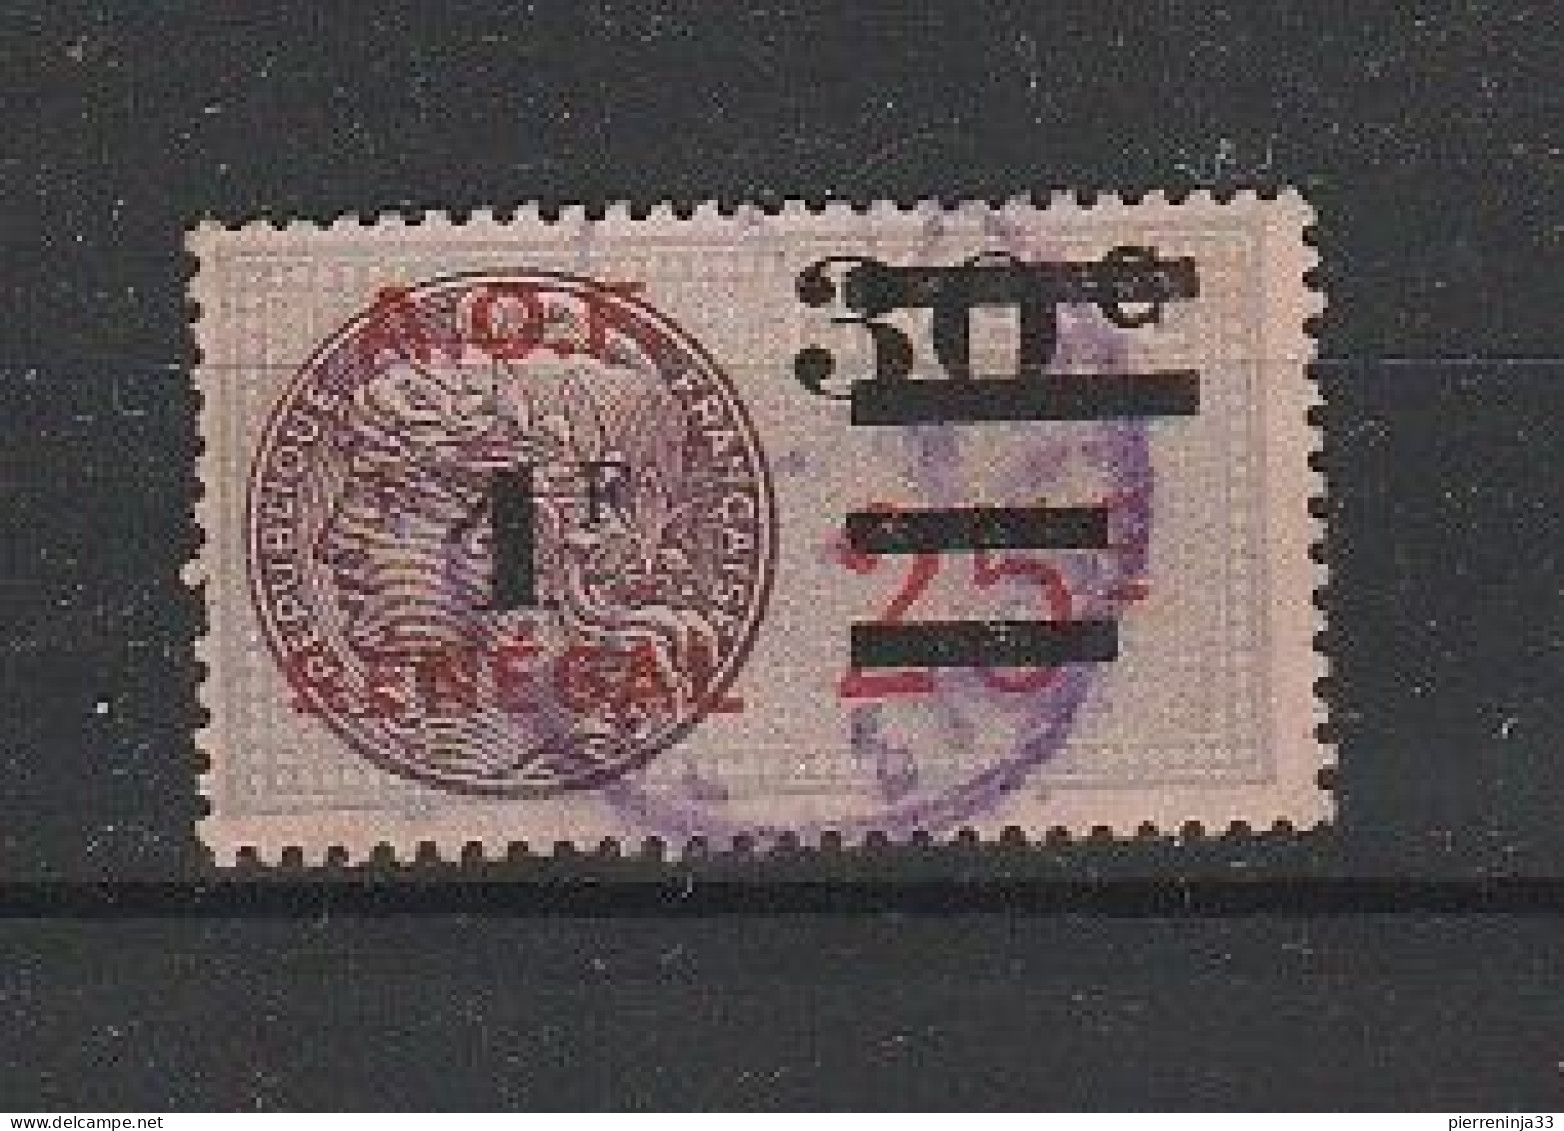 Timbre Fiscal AOF/Sénégal Double Surcharge Barrée - Used Stamps